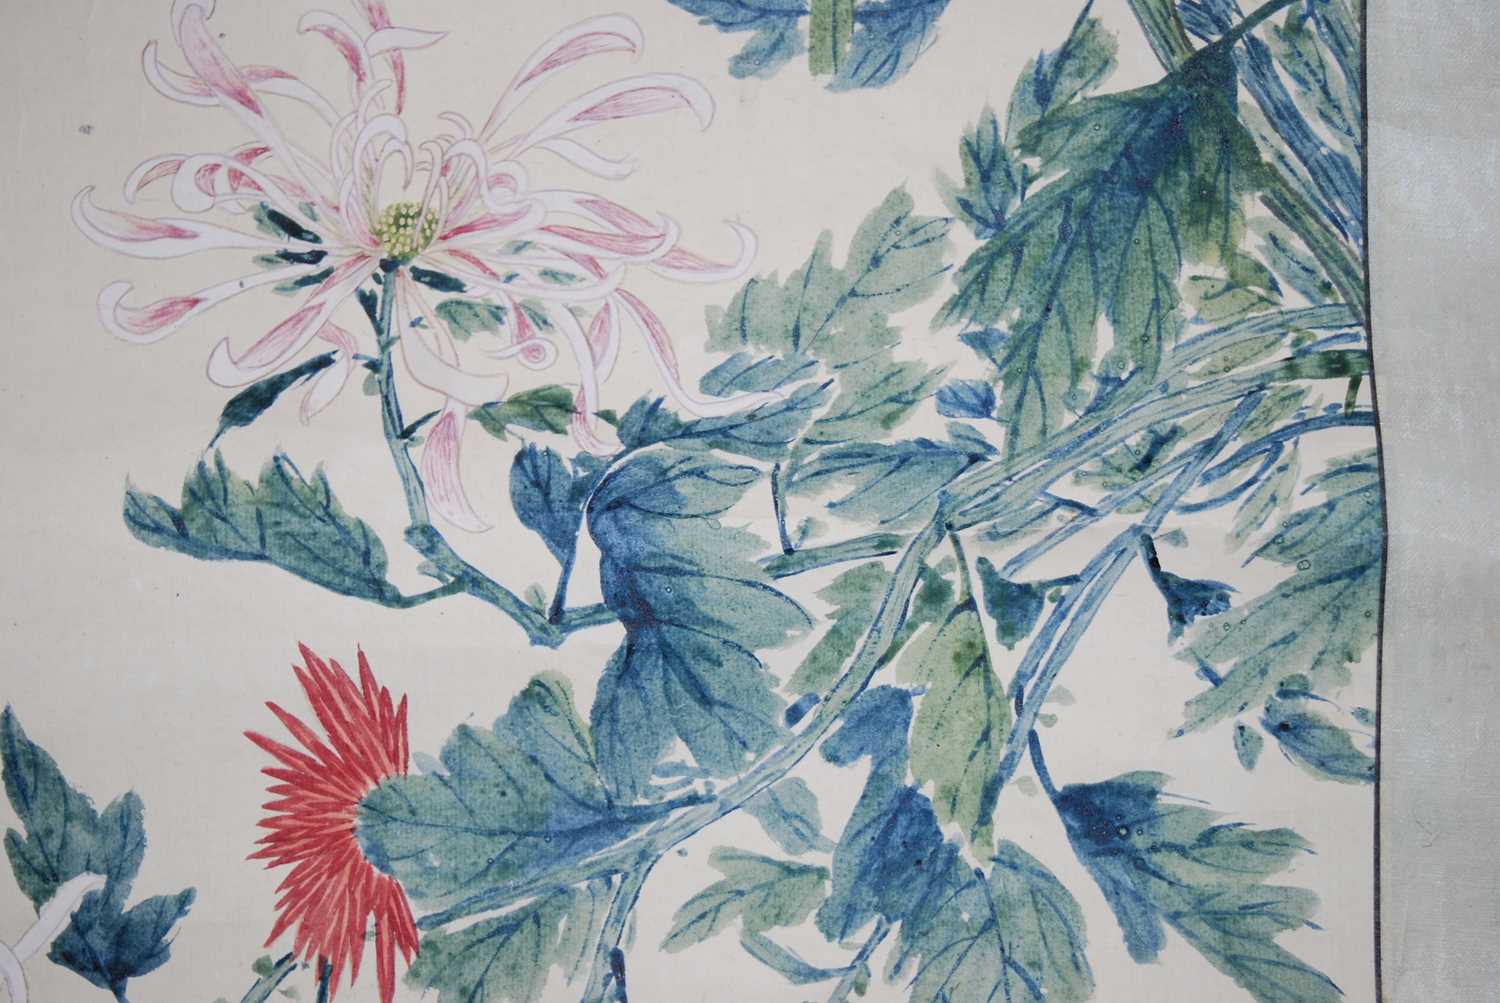 Yuan Yunyi (袁韻宜) (1920-2004) - Chrysanthemums, Republic of China scroll painting dated 1944, ink - Image 21 of 31